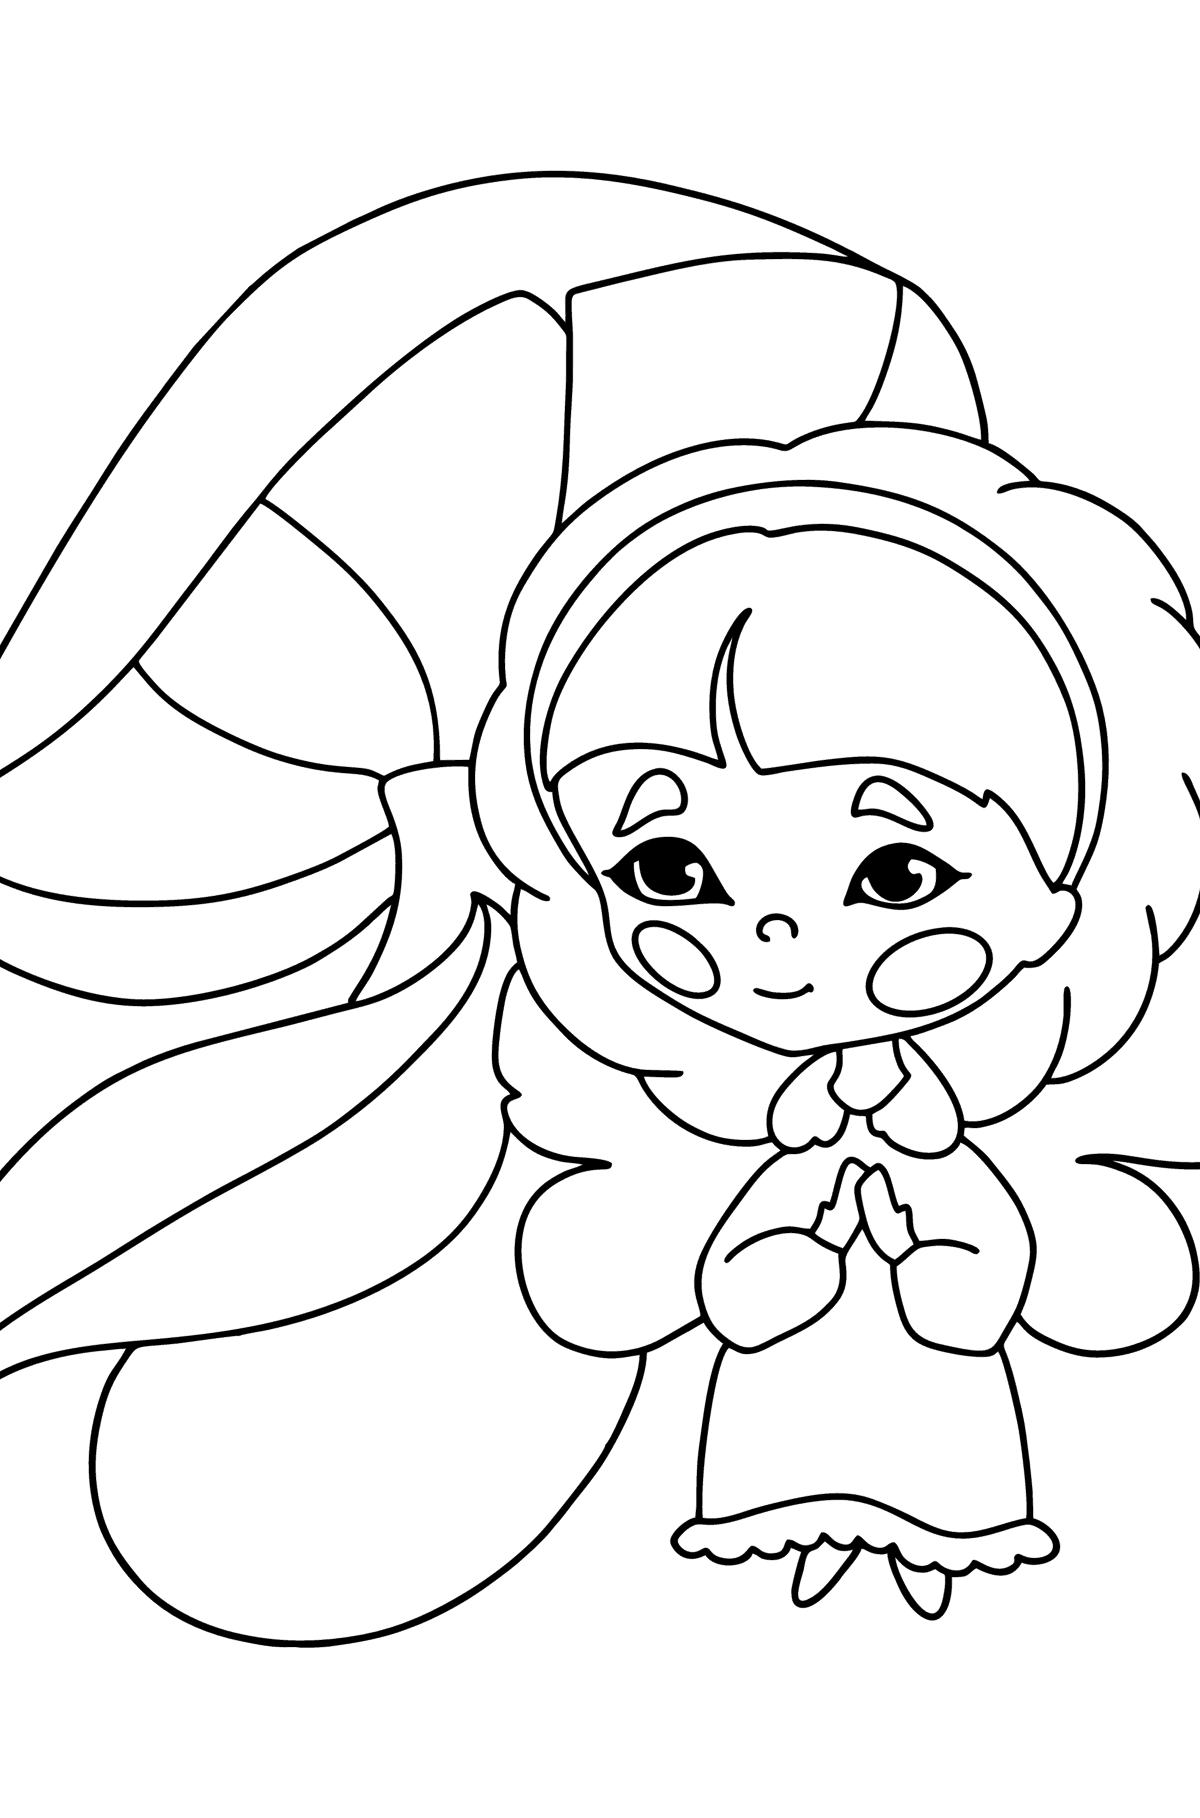 fairy and mushroom coloring page - Coloring Pages for Kids